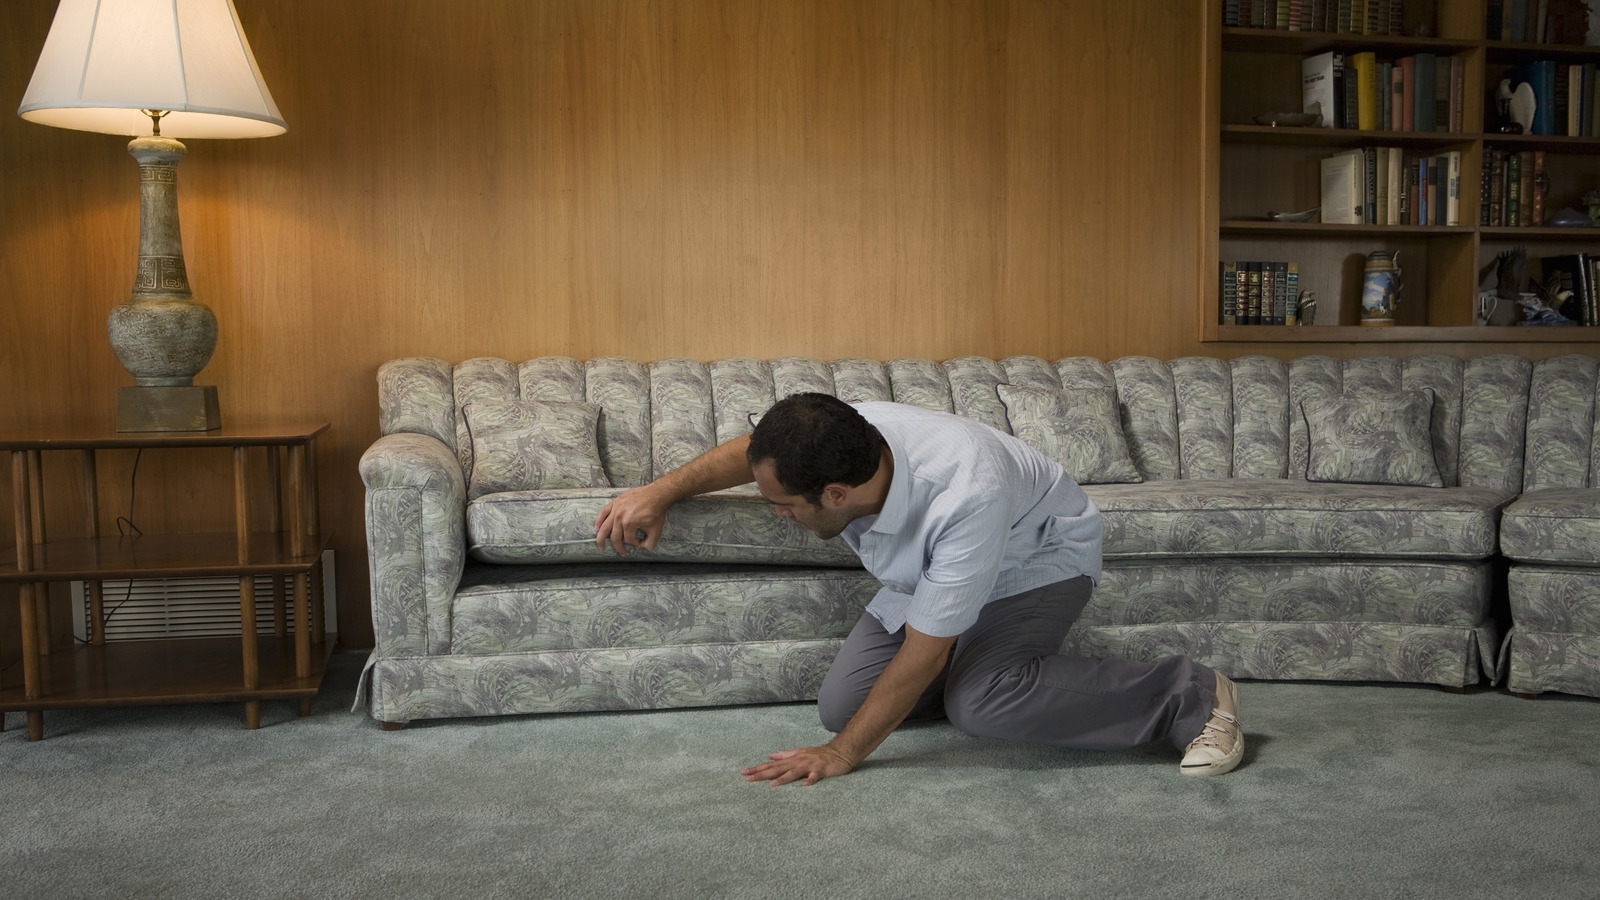 https://www.housedigest.com/img/gallery/the-easy-hack-to-keep-your-sofas-cushions-from-sliding-around/l-intro-1698865702.jpg